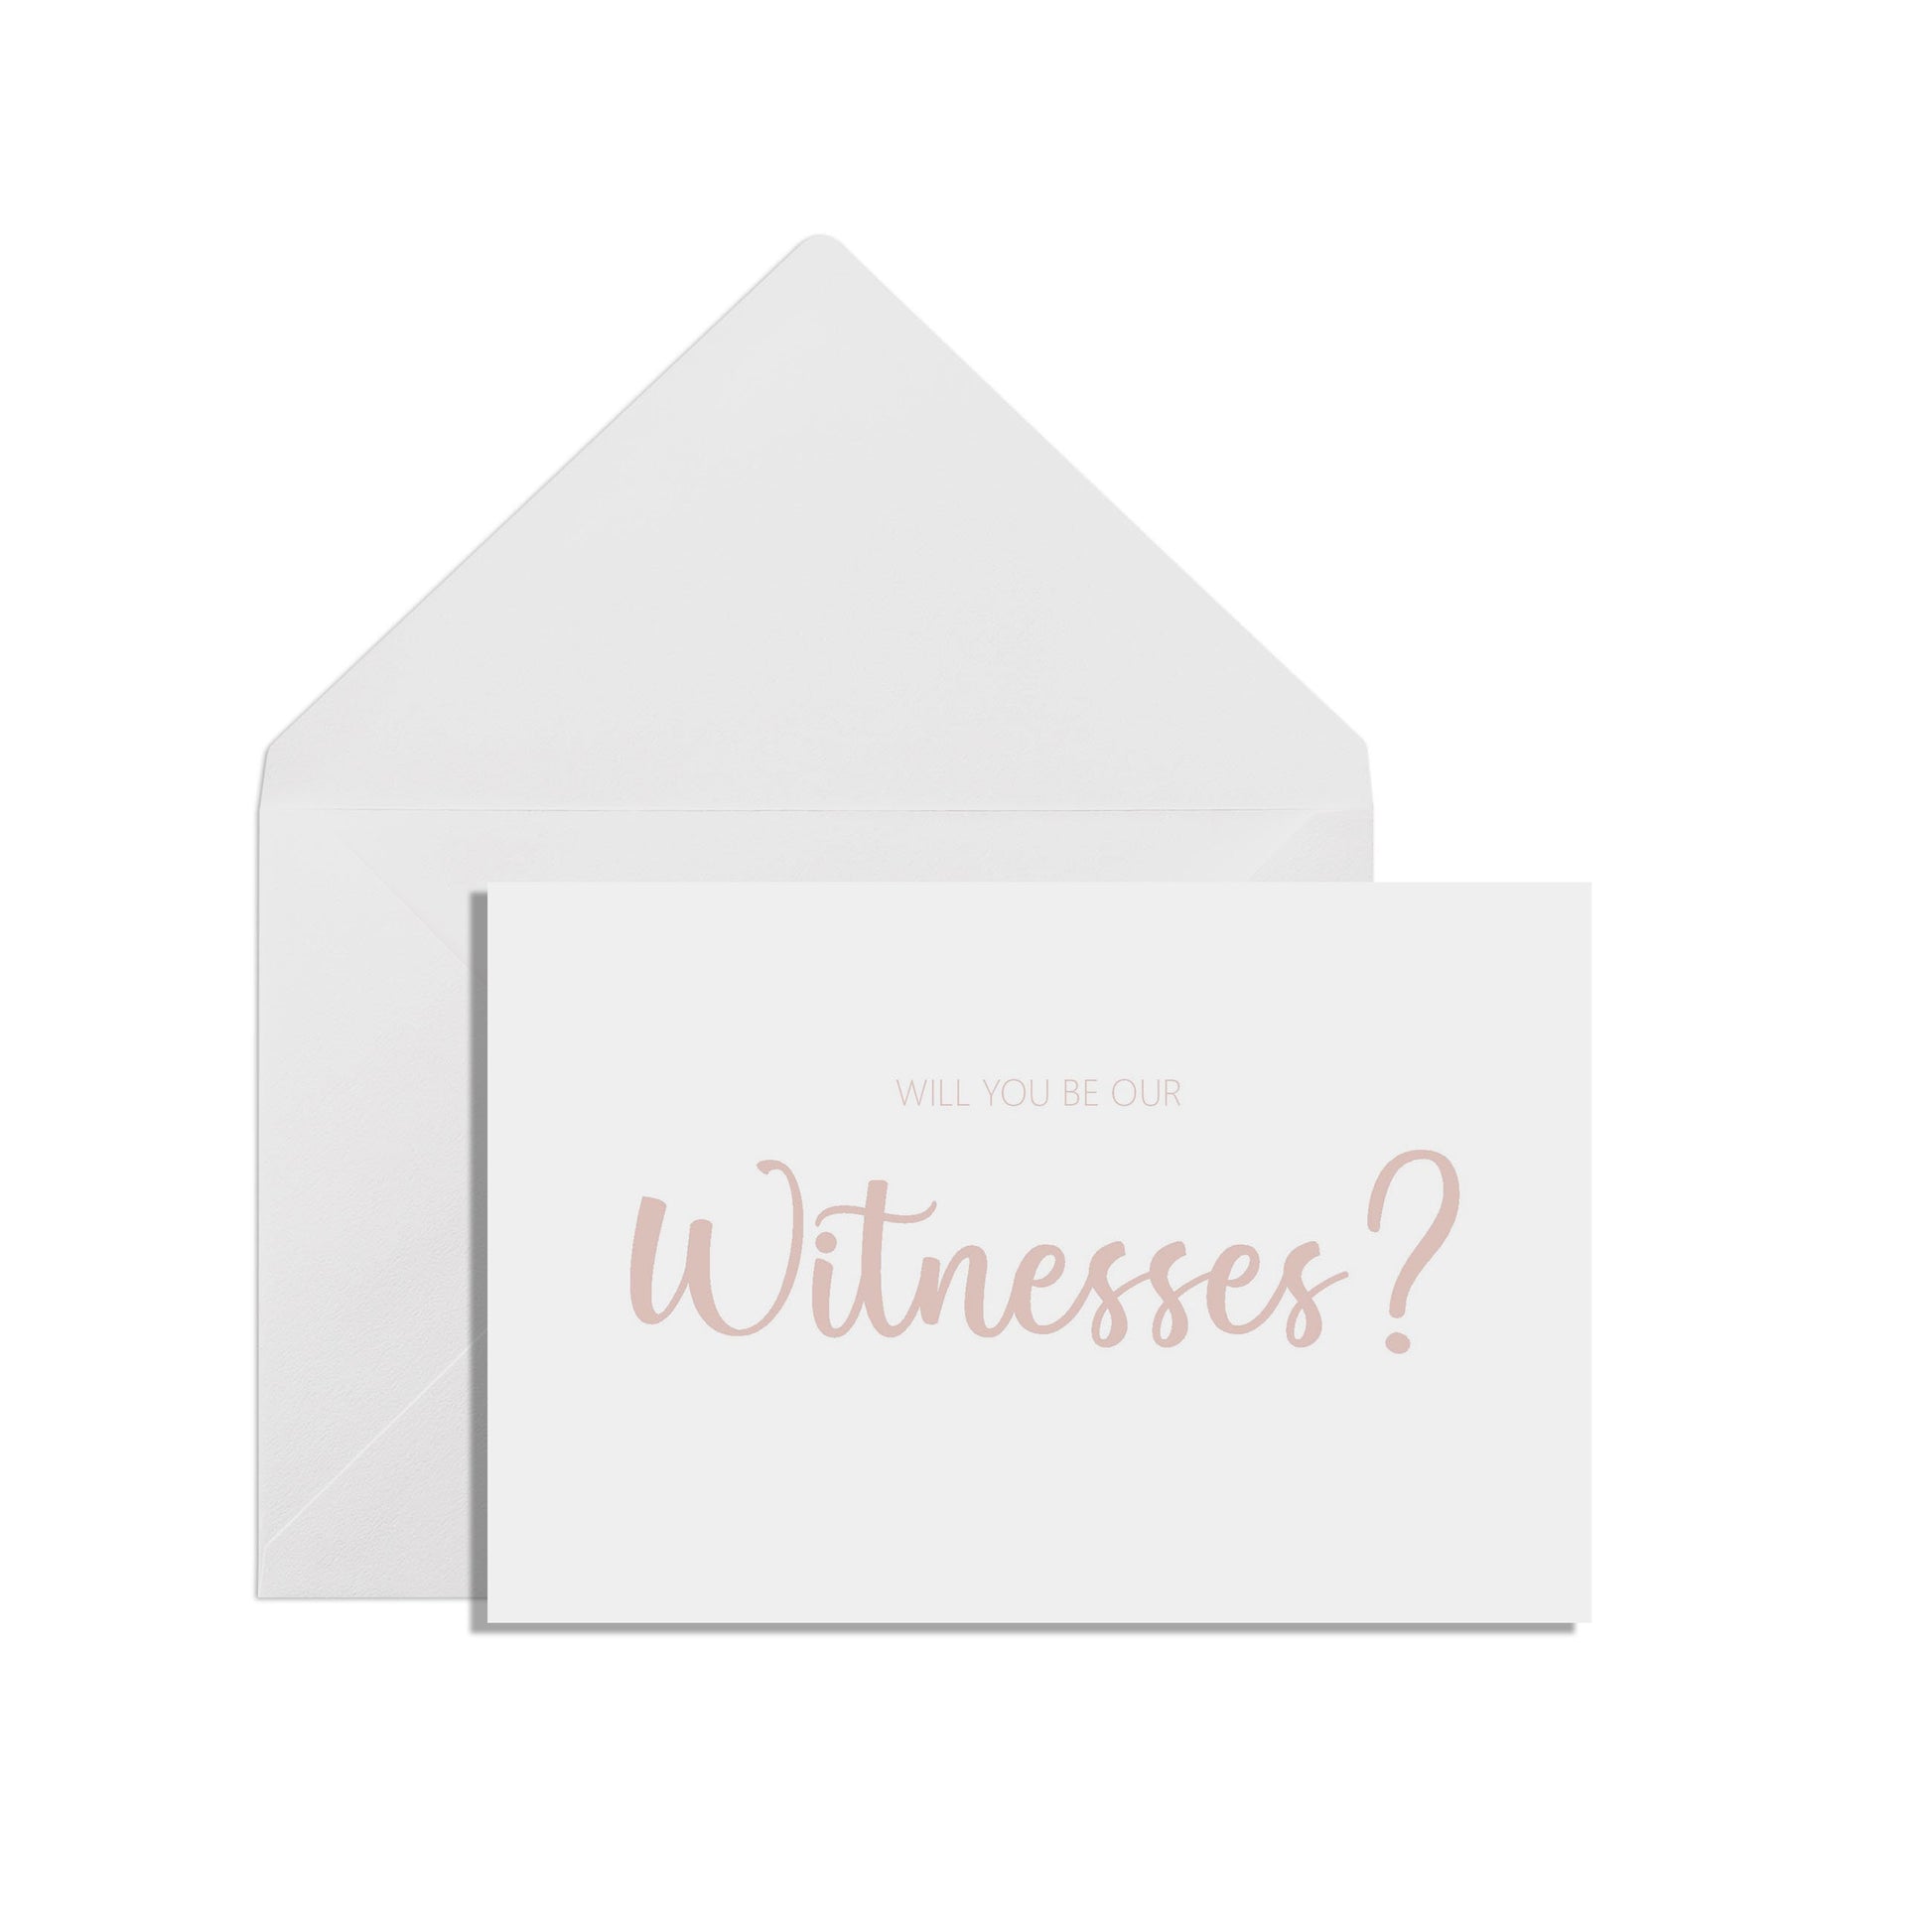 Will You Be Our Witnesses? A6 Rose Gold Effect Proposal Card With White Envelope